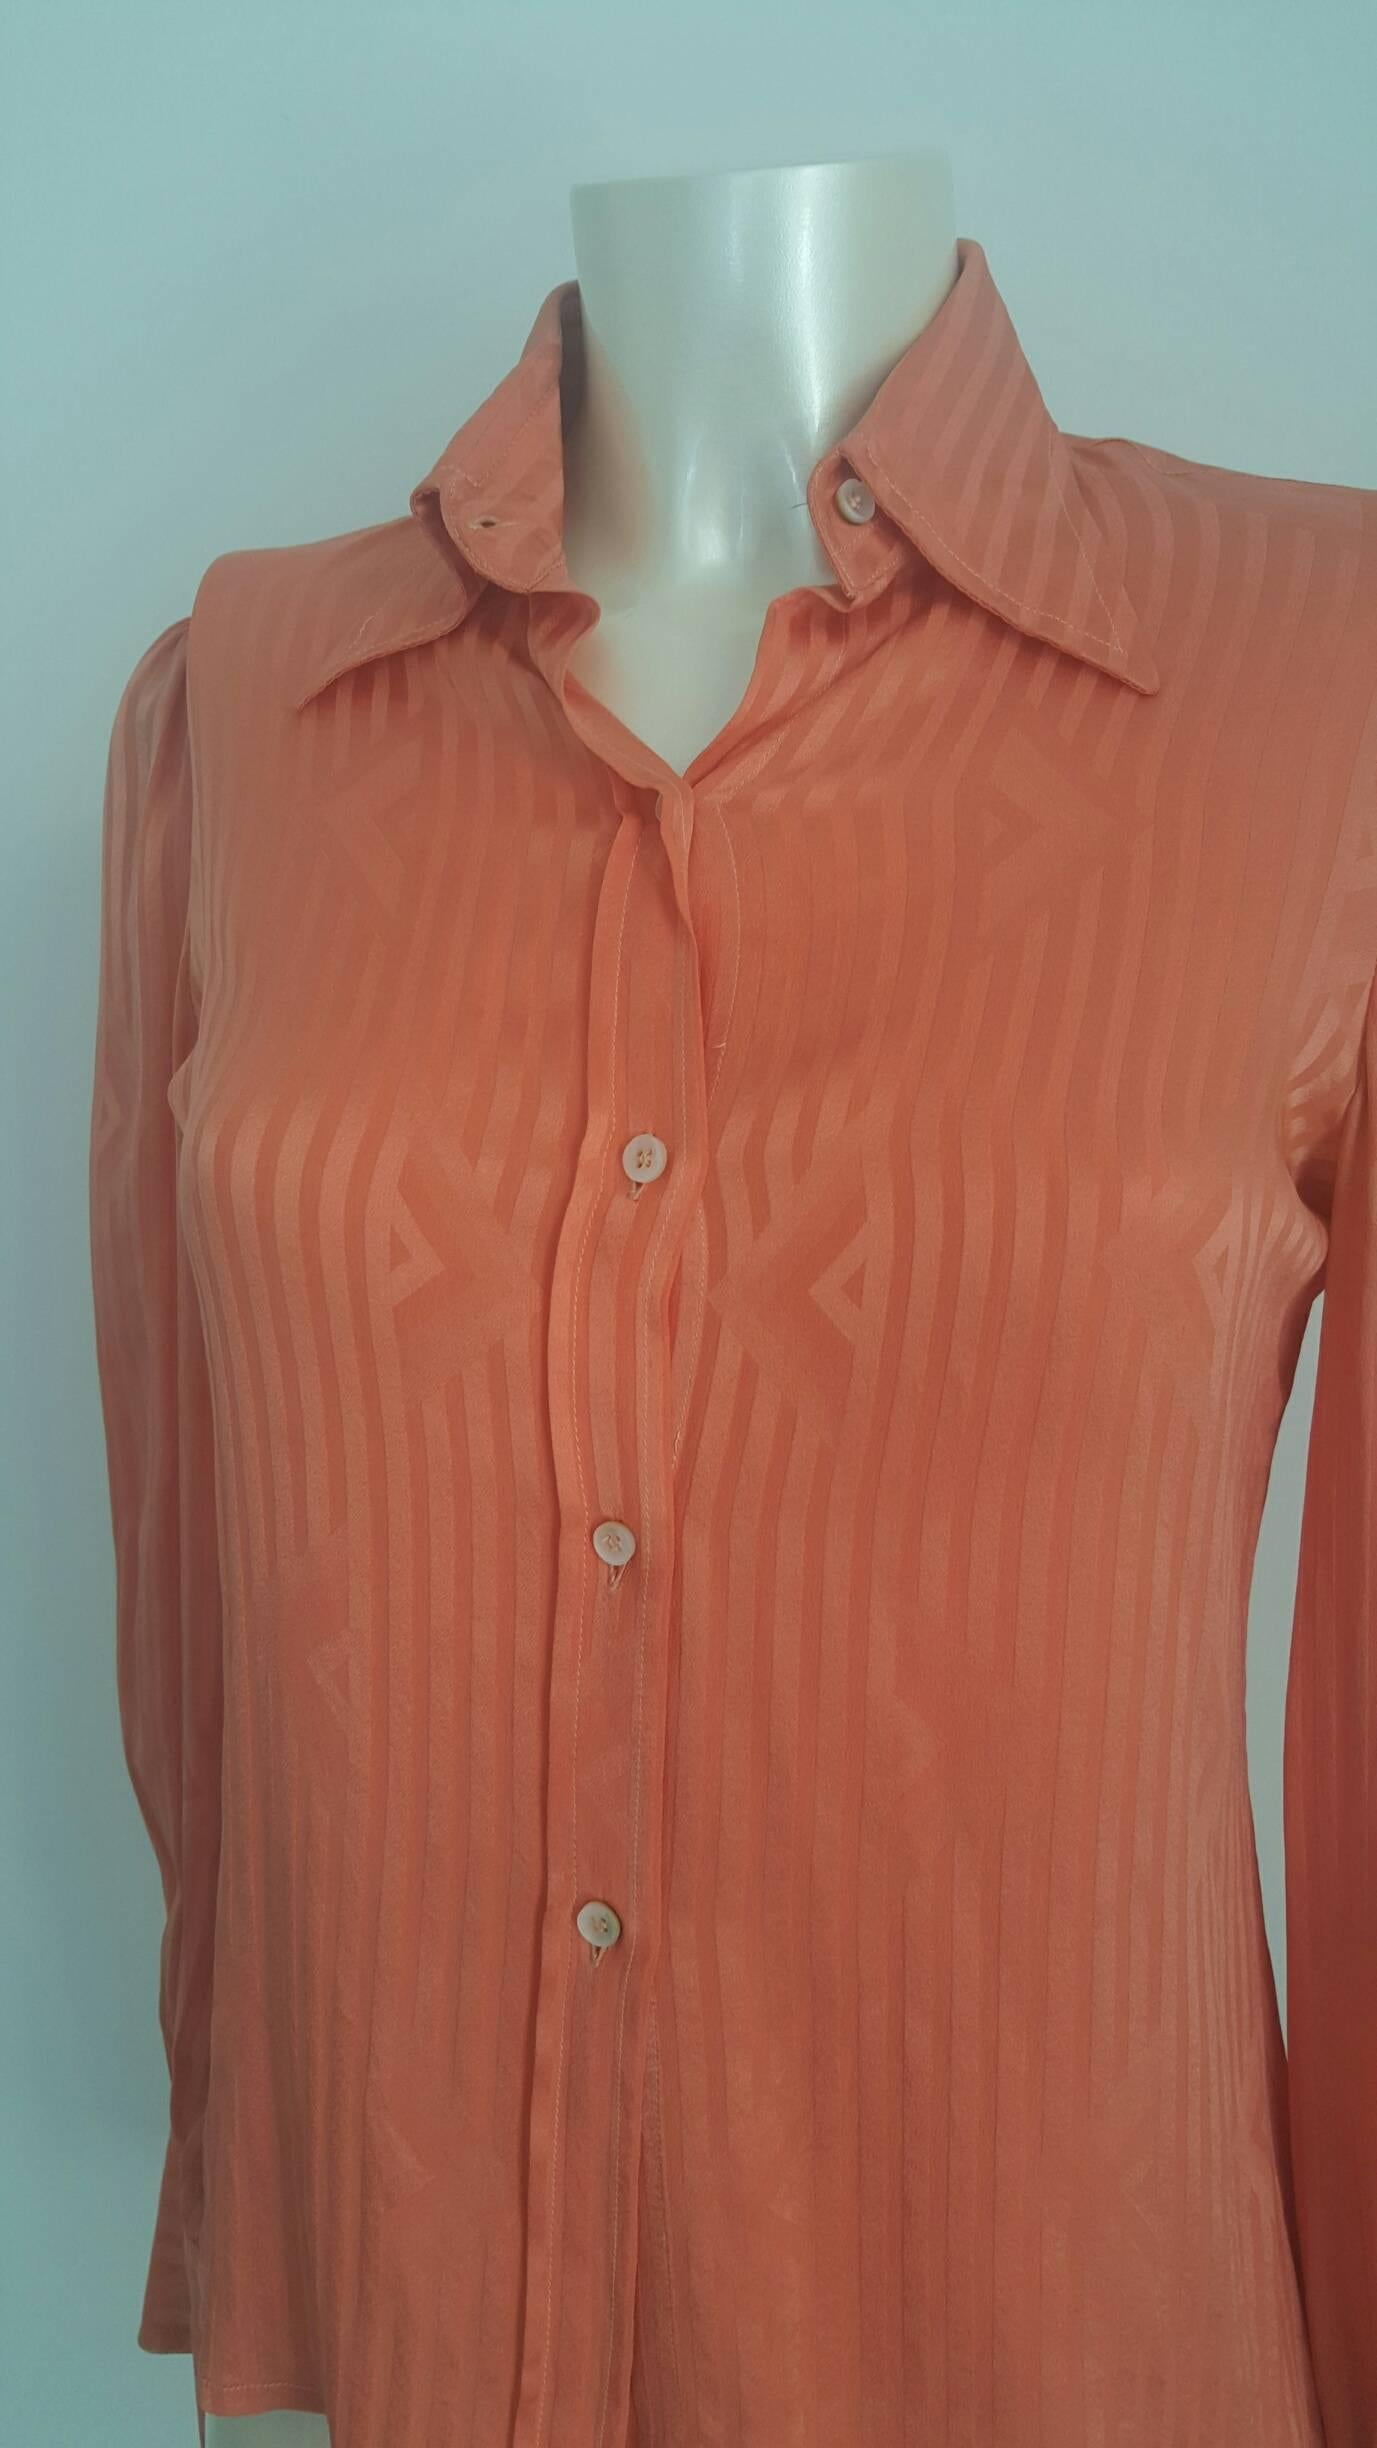 1990s Valentino peach shirt 100% Silk 

Valentino boutique Roma shirt in peach colour totally made in italy in 100% silk in usa size range 10